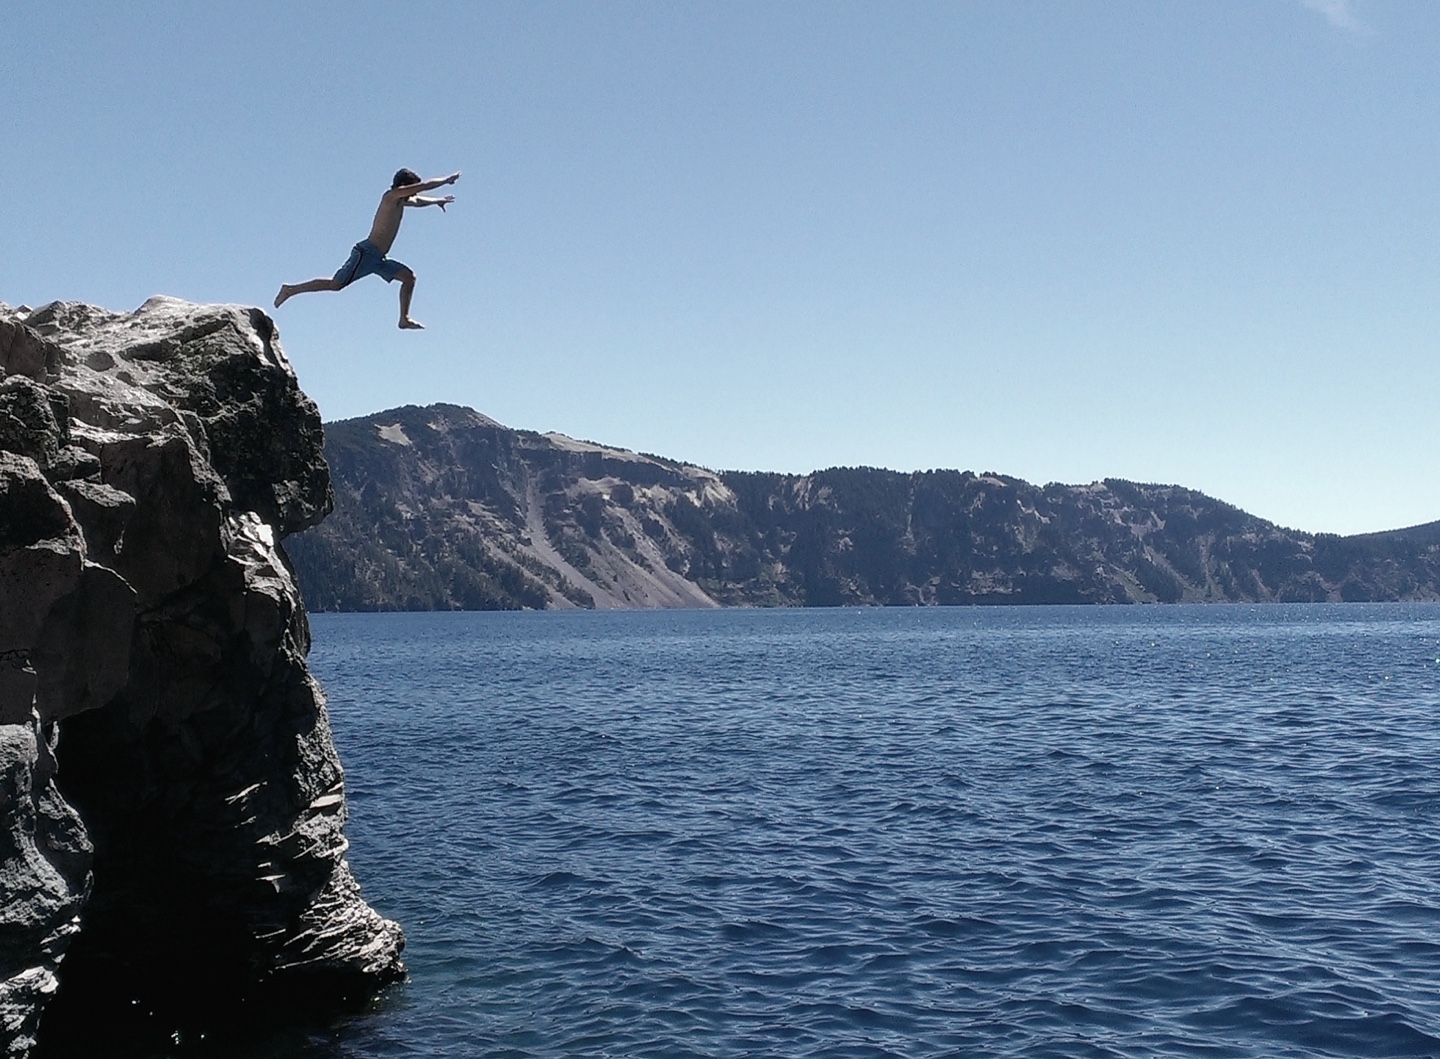 [photo: Jumping into Crater Lake]